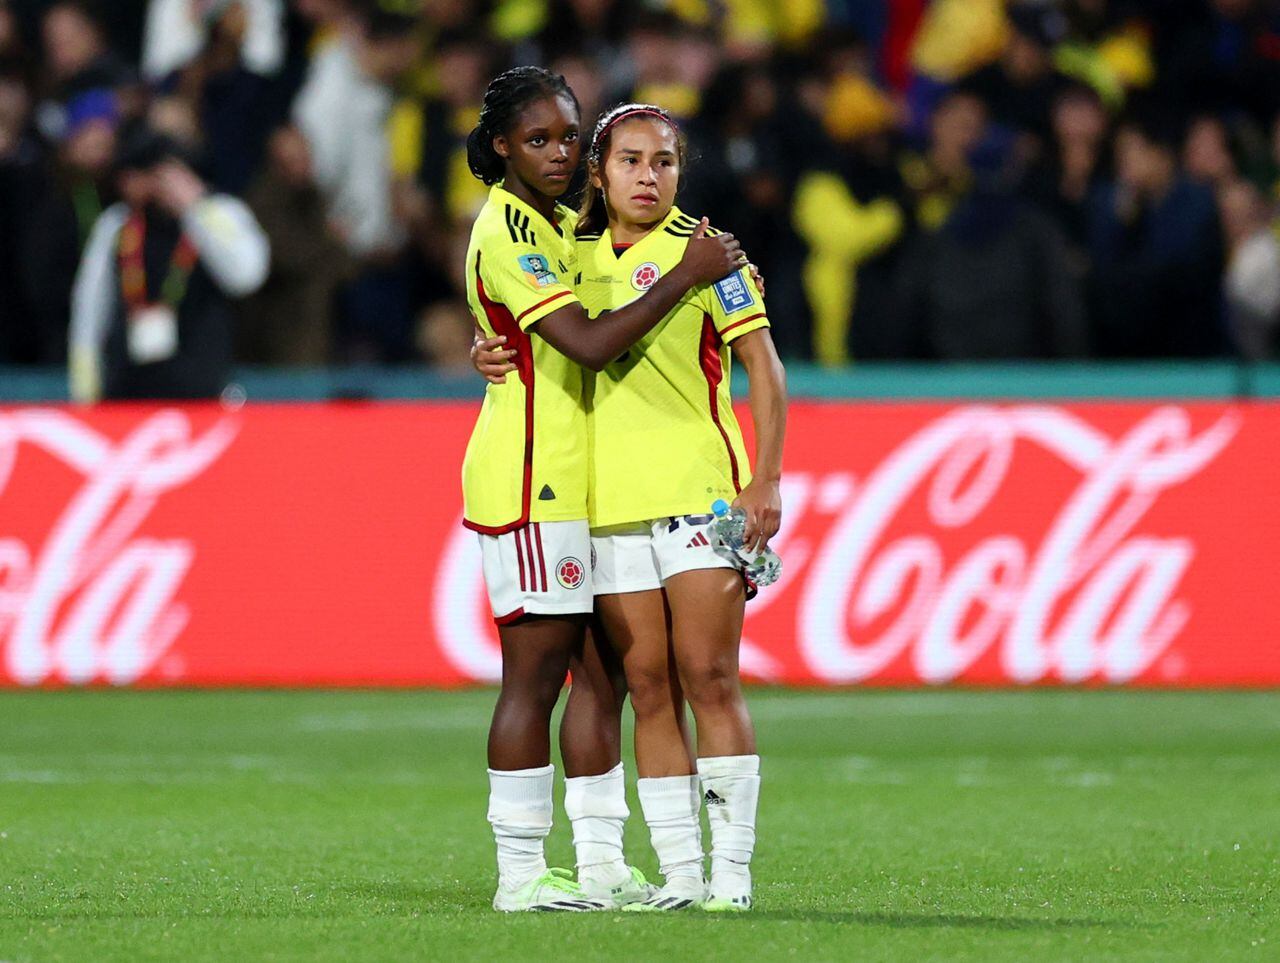 Soccer Football - FIFA Women’s World Cup Australia and New Zealand 2023 - Group H - Morocco v Colombia - Perth Rectangular Stadium, Perth, Australia - August 3, 2023 Colombia's Leicy Santos and Linda Caicedo celebrate after the match as Colombia qualify for the knockout stages of the World Cup REUTERS/Luisa Gonzalez